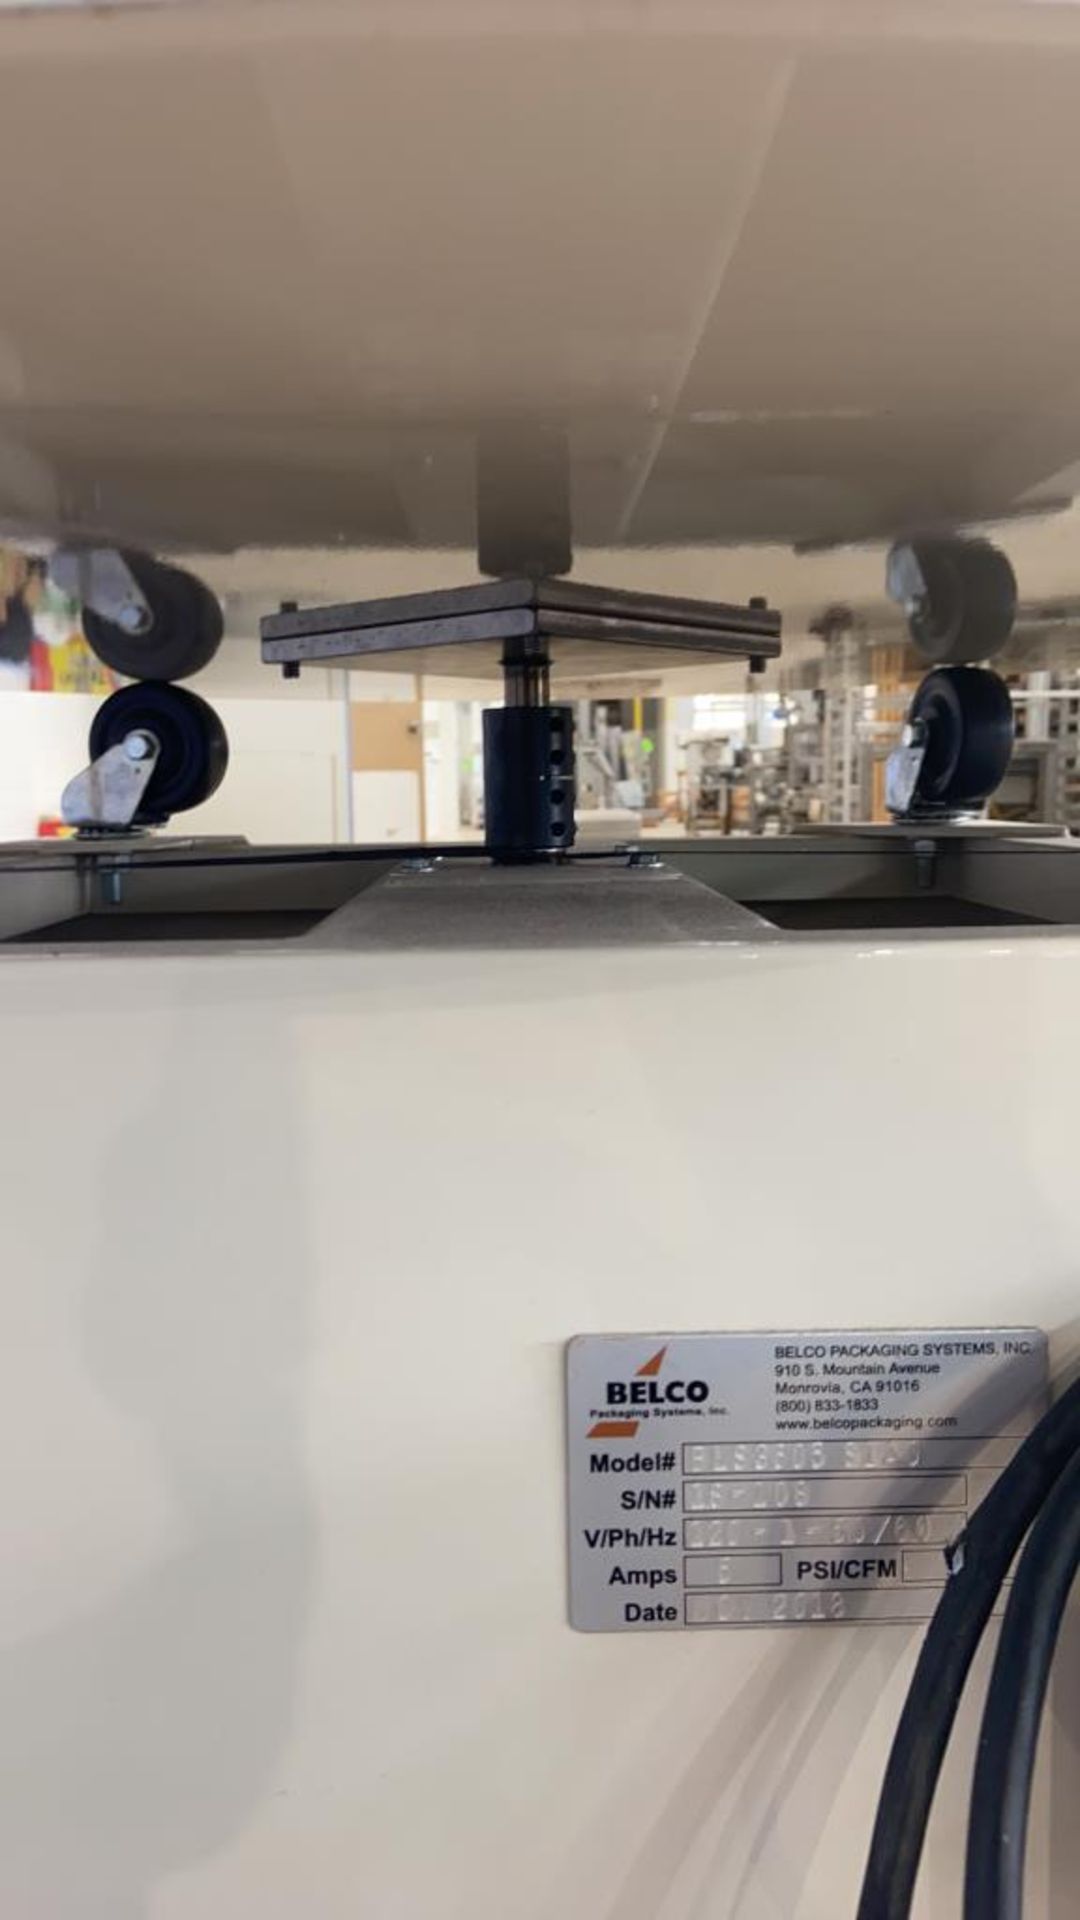 2018 Belco Packaging Systems Inc. 36" Dia. Accumulation Table, M/N BLS3605 S1A0, S/N 18-108, 120 - Image 7 of 8